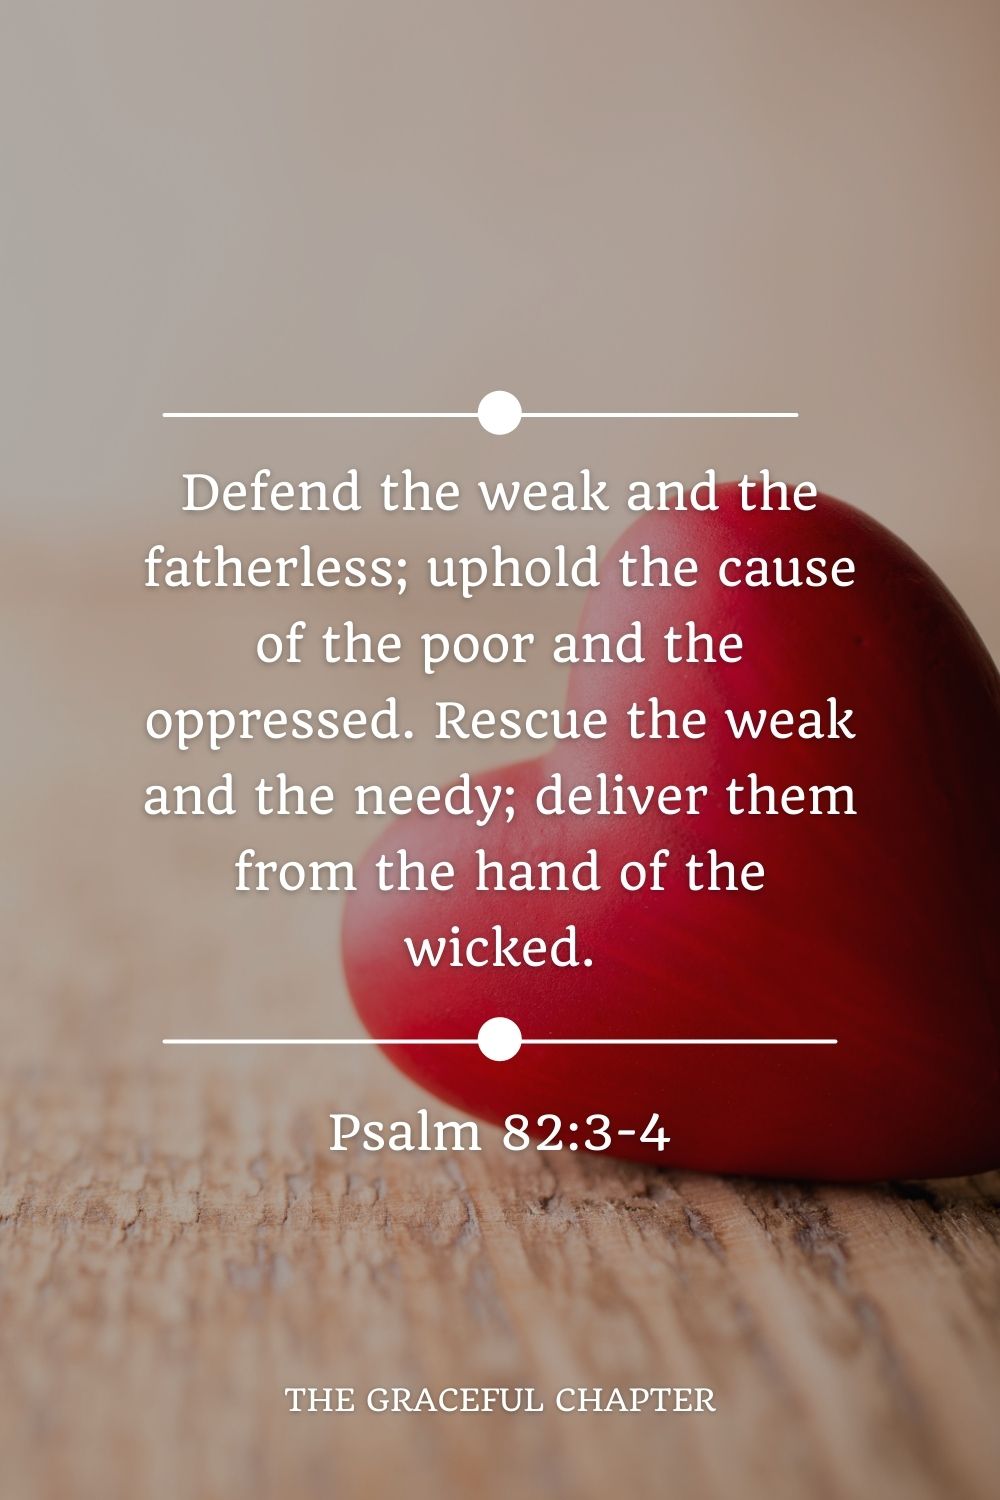 Defend the weak and the fatherless; uphold the cause of the poor and the oppressed. Rescue the weak and the needy; deliver them from the hand of the wicked. Psalm 82:3-4